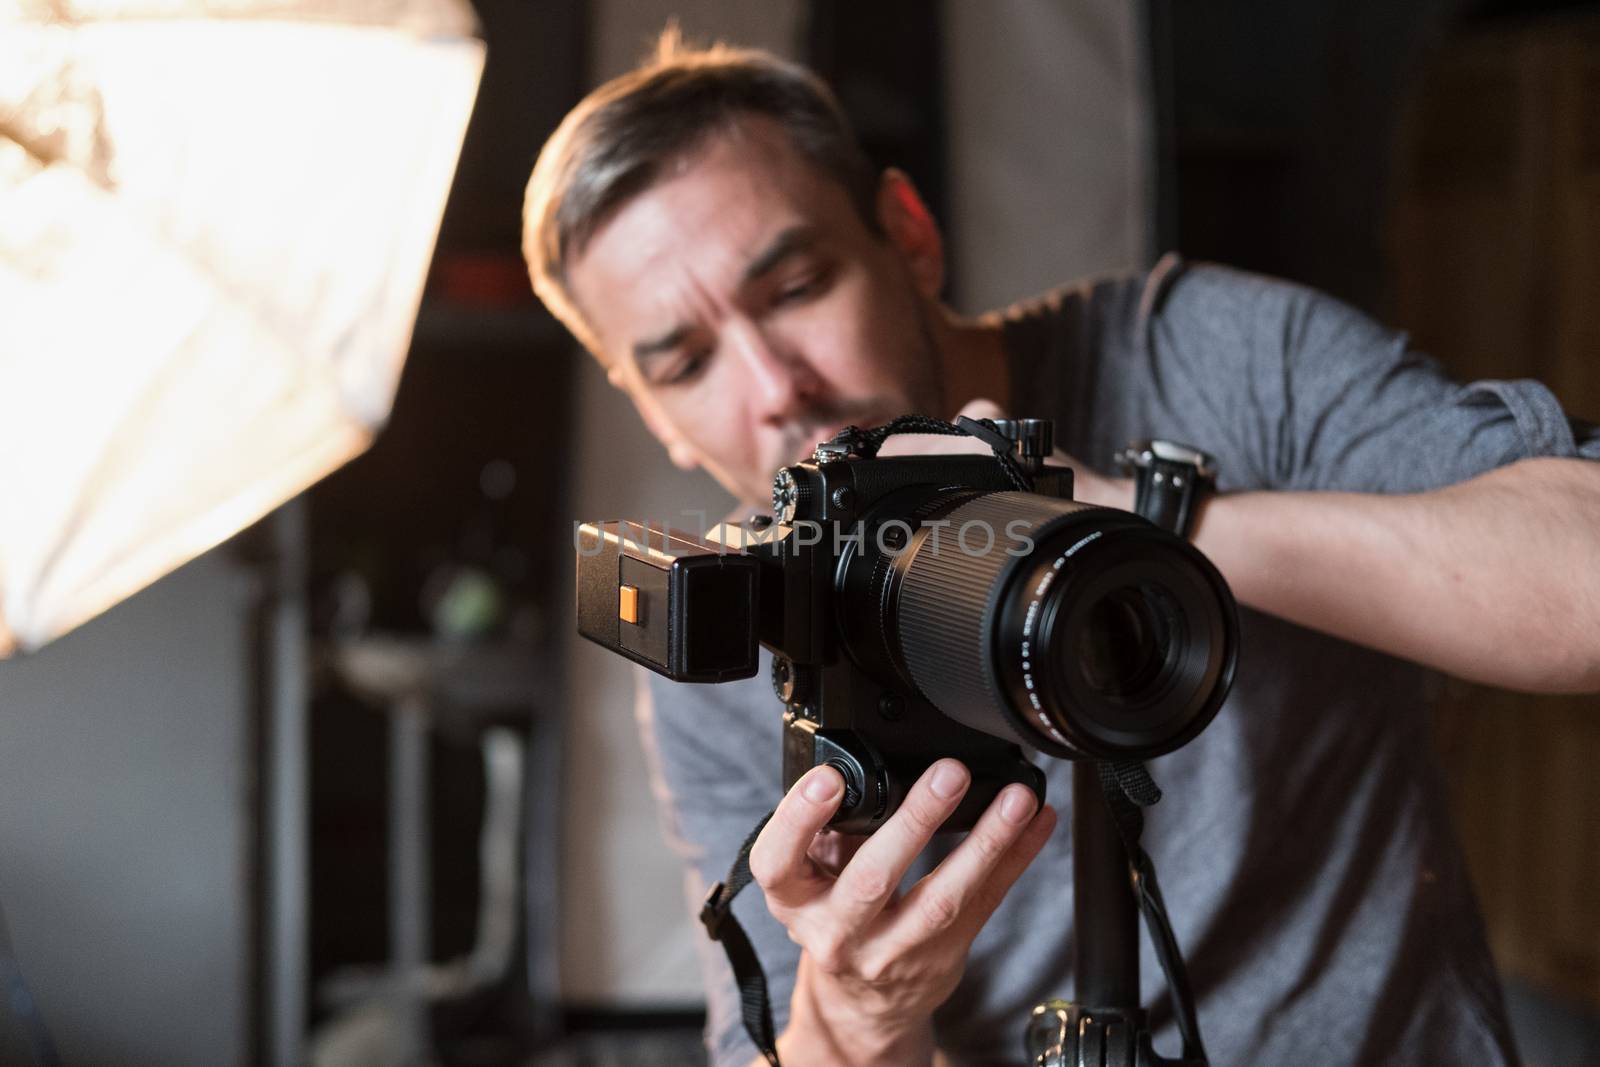 the young man adjusts the camera during photographing in the Studio